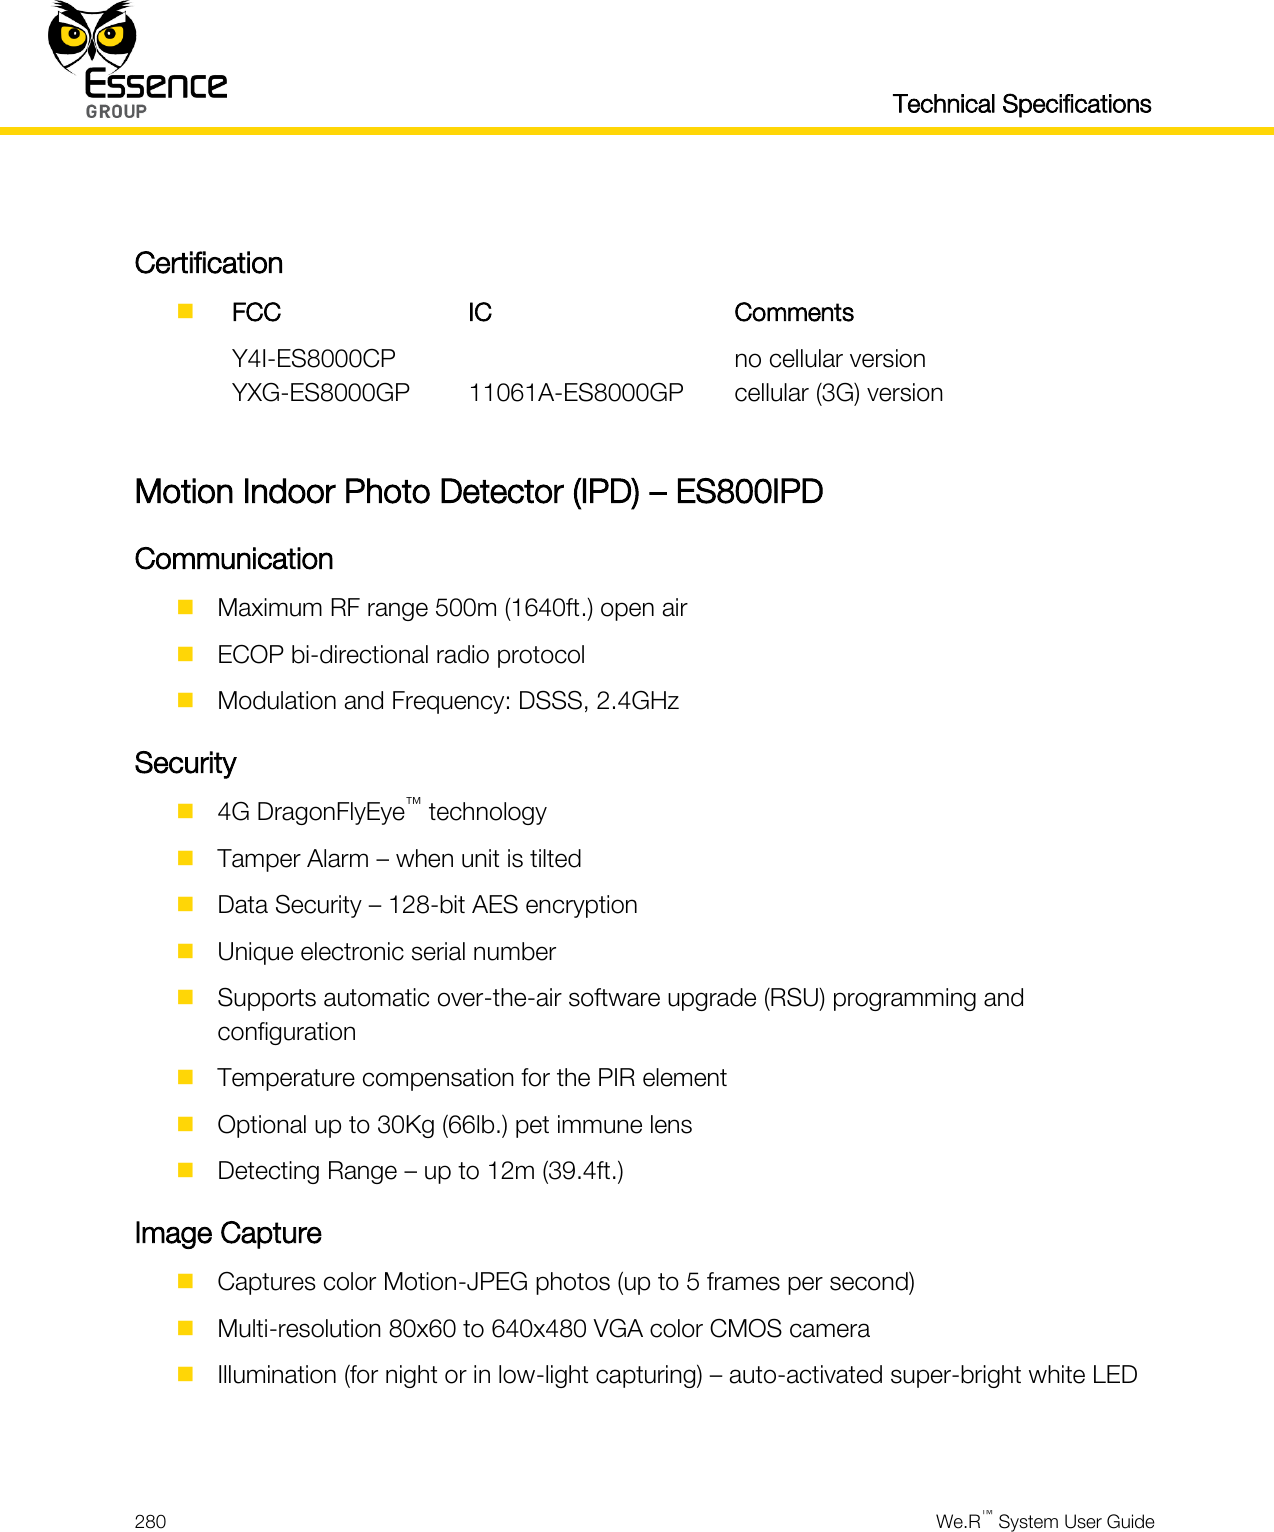   Technical Specifications  280  We.R™ System User Guide   Certification   FCC IC Comments  Y4I-ES8000CP  no cellular version  YXG-ES8000GP 11061A-ES8000GP cellular (3G) version  Motion Indoor Photo Detector (IPD) – ES800IPD Communication  Maximum RF range 500m (1640ft.) open air  ECOP bi-directional radio protocol  Modulation and Frequency: DSSS, 2.4GHz Security  4G DragonFlyEye™ technology  Tamper Alarm – when unit is tilted  Data Security – 128-bit AES encryption  Unique electronic serial number  Supports automatic over-the-air software upgrade (RSU) programming and configuration  Temperature compensation for the PIR element  Optional up to 30Kg (66lb.) pet immune lens  Detecting Range – up to 12m (39.4ft.) Image Capture  Captures color Motion-JPEG photos (up to 5 frames per second)  Multi-resolution 80x60 to 640x480 VGA color CMOS camera  Illumination (for night or in low-light capturing) – auto-activated super-bright white LED  